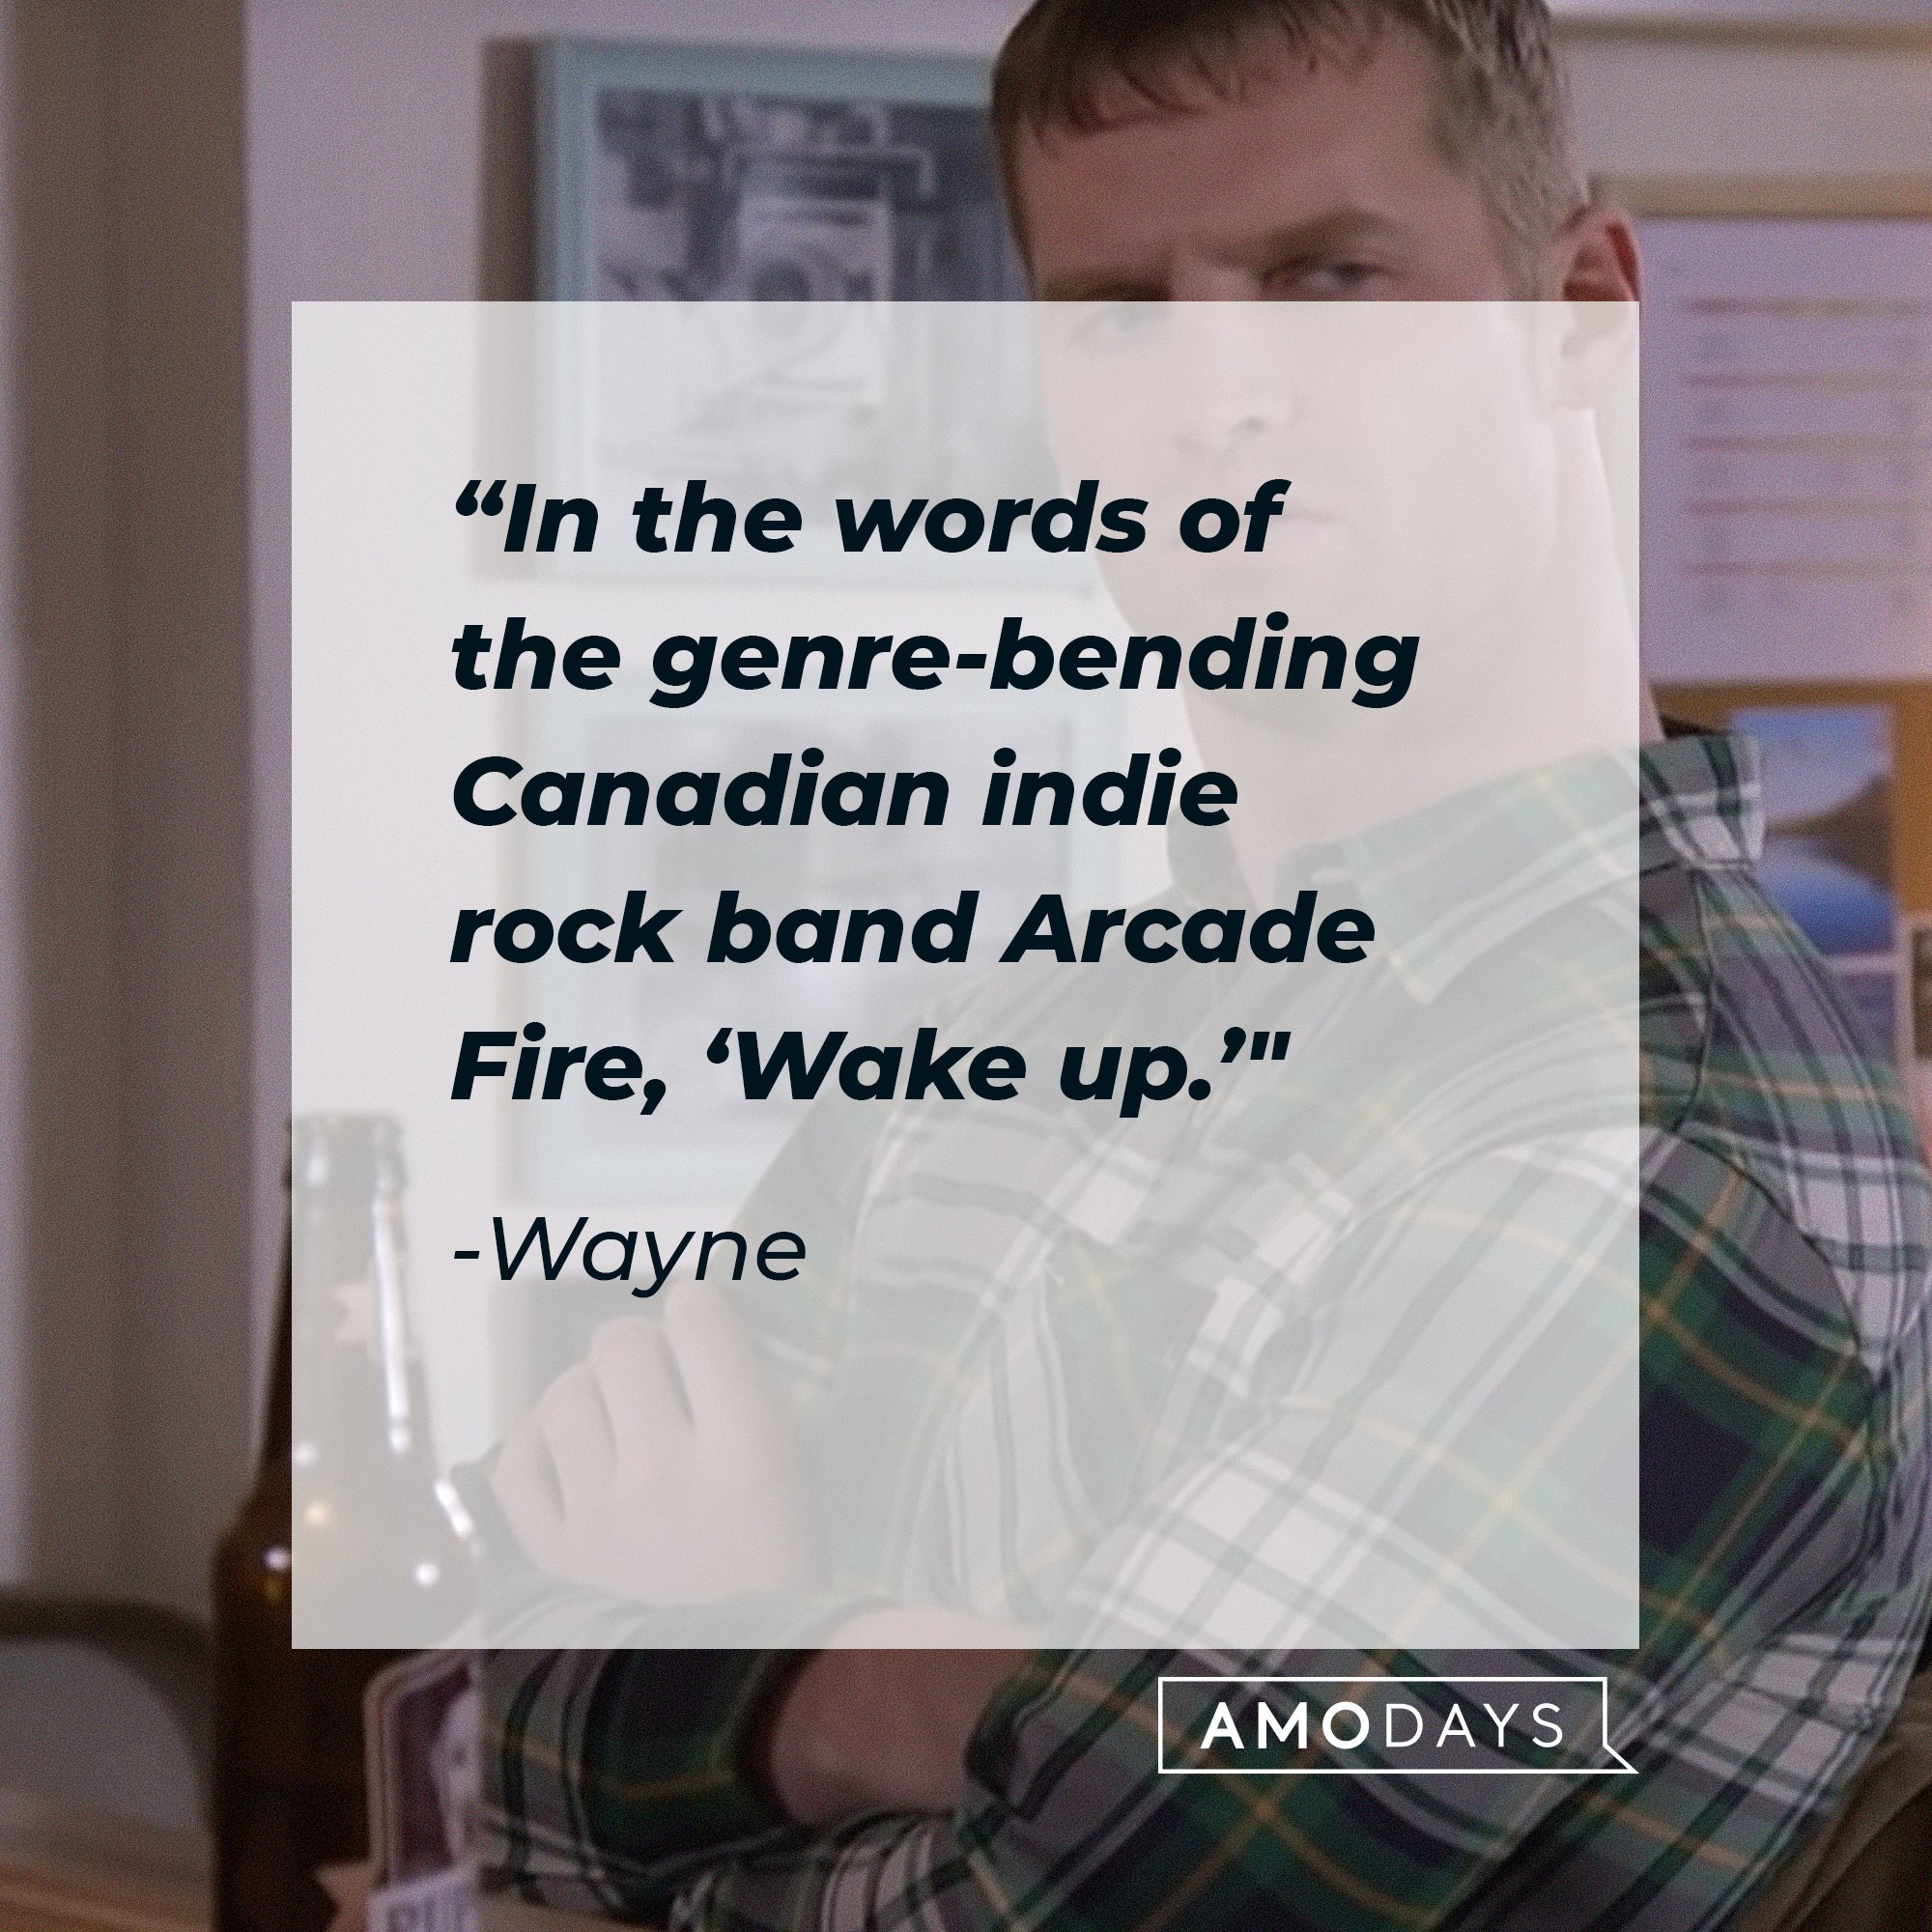 Wayne’s quote: “In the words of the genre-bending Canadian indie rock band Arcade Fire, ‘Wake up.’" | Image: AmoDays